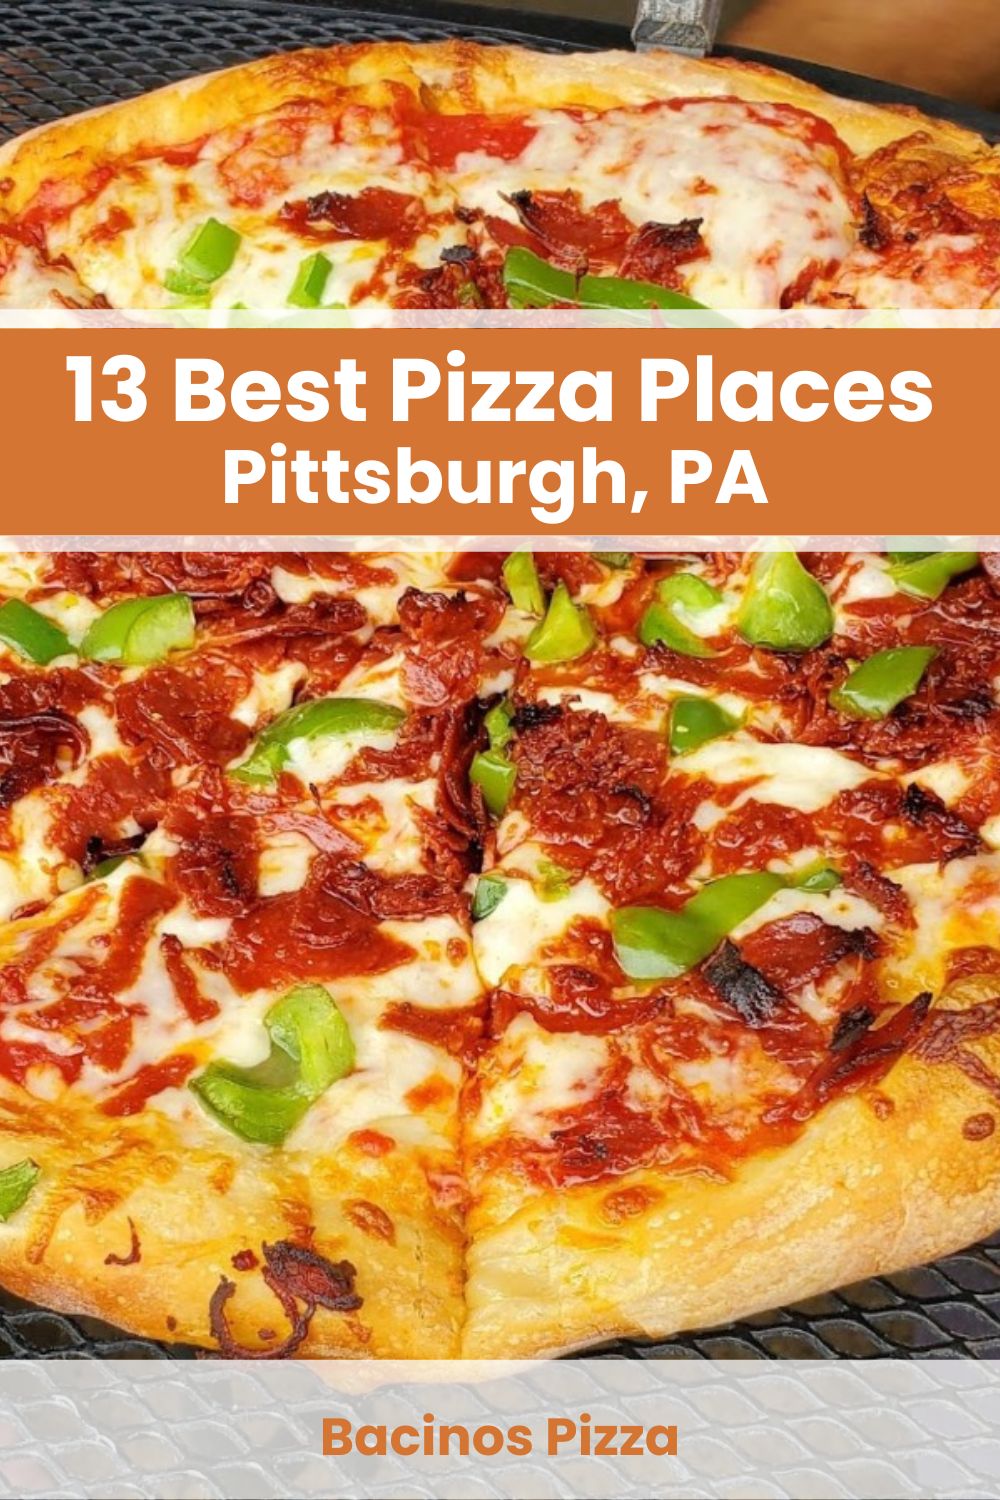 Best Pizza Place in Pittsburgh